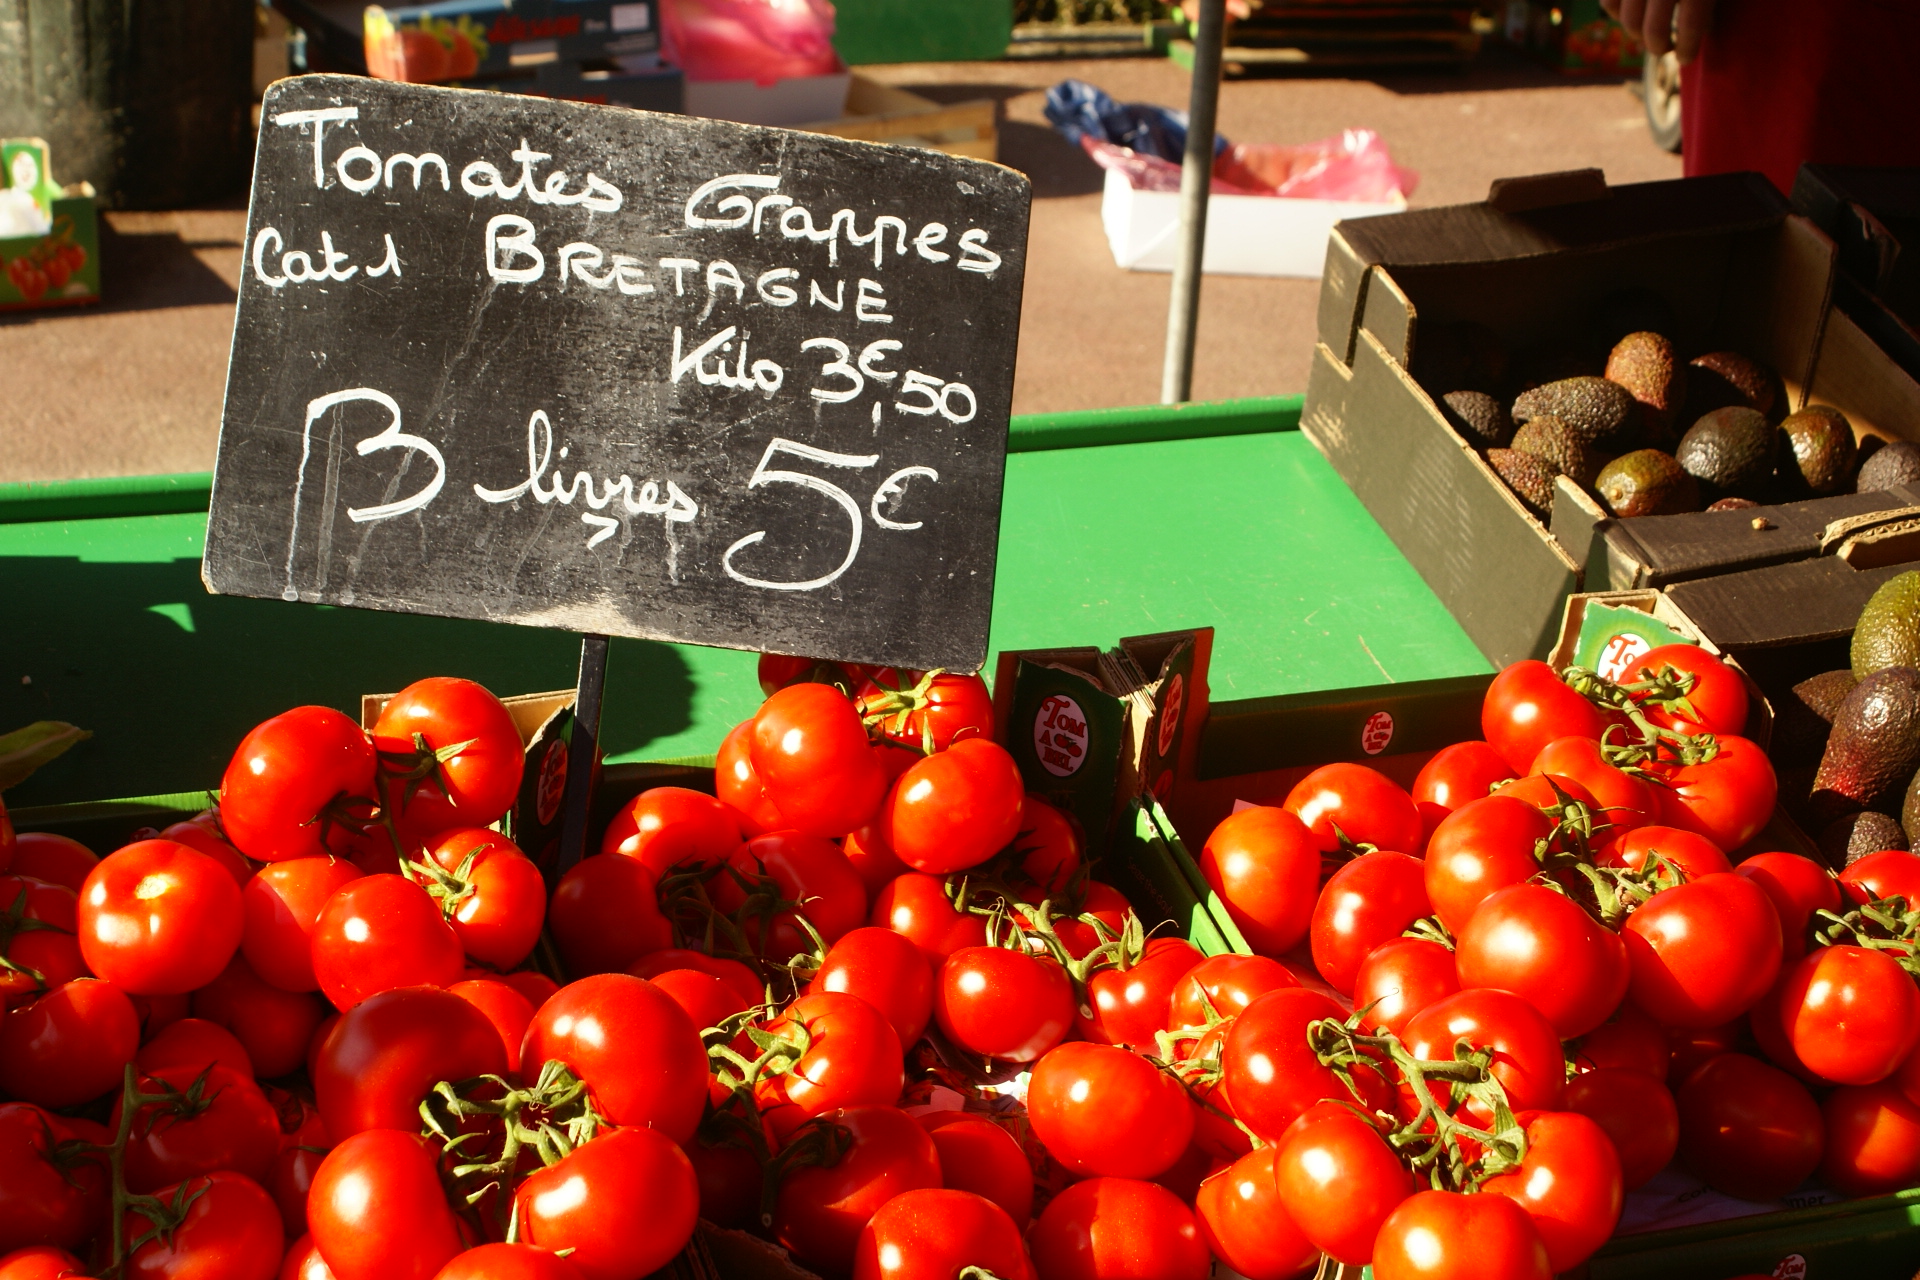 Tomatoes dold by the livre (pound) at a Normandy market